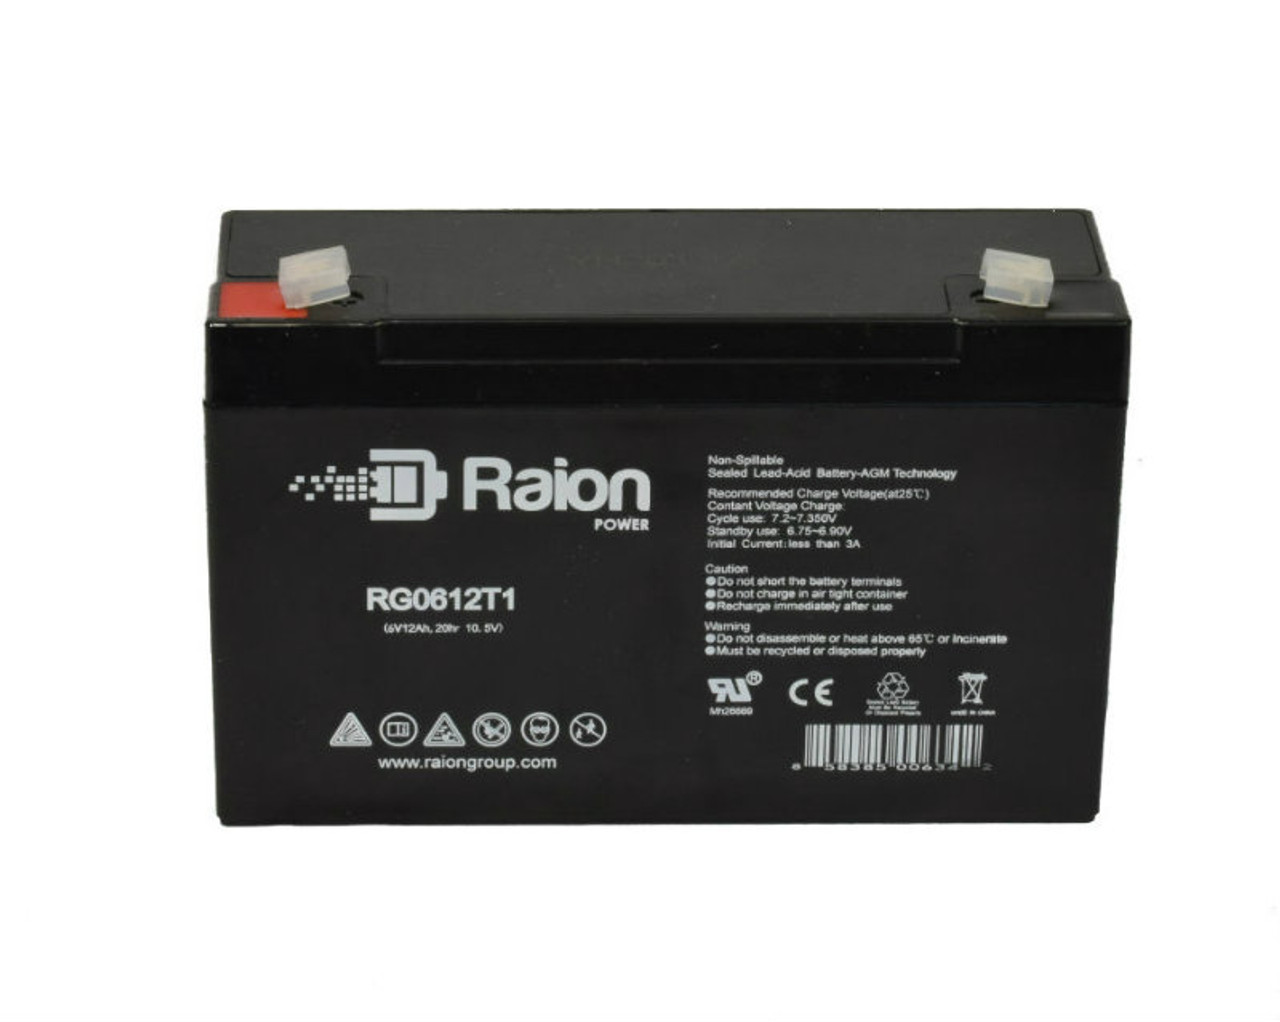 Raion Power RG06120T1 SLA Battery for Baxter Healthcare 800 Infusion Pump